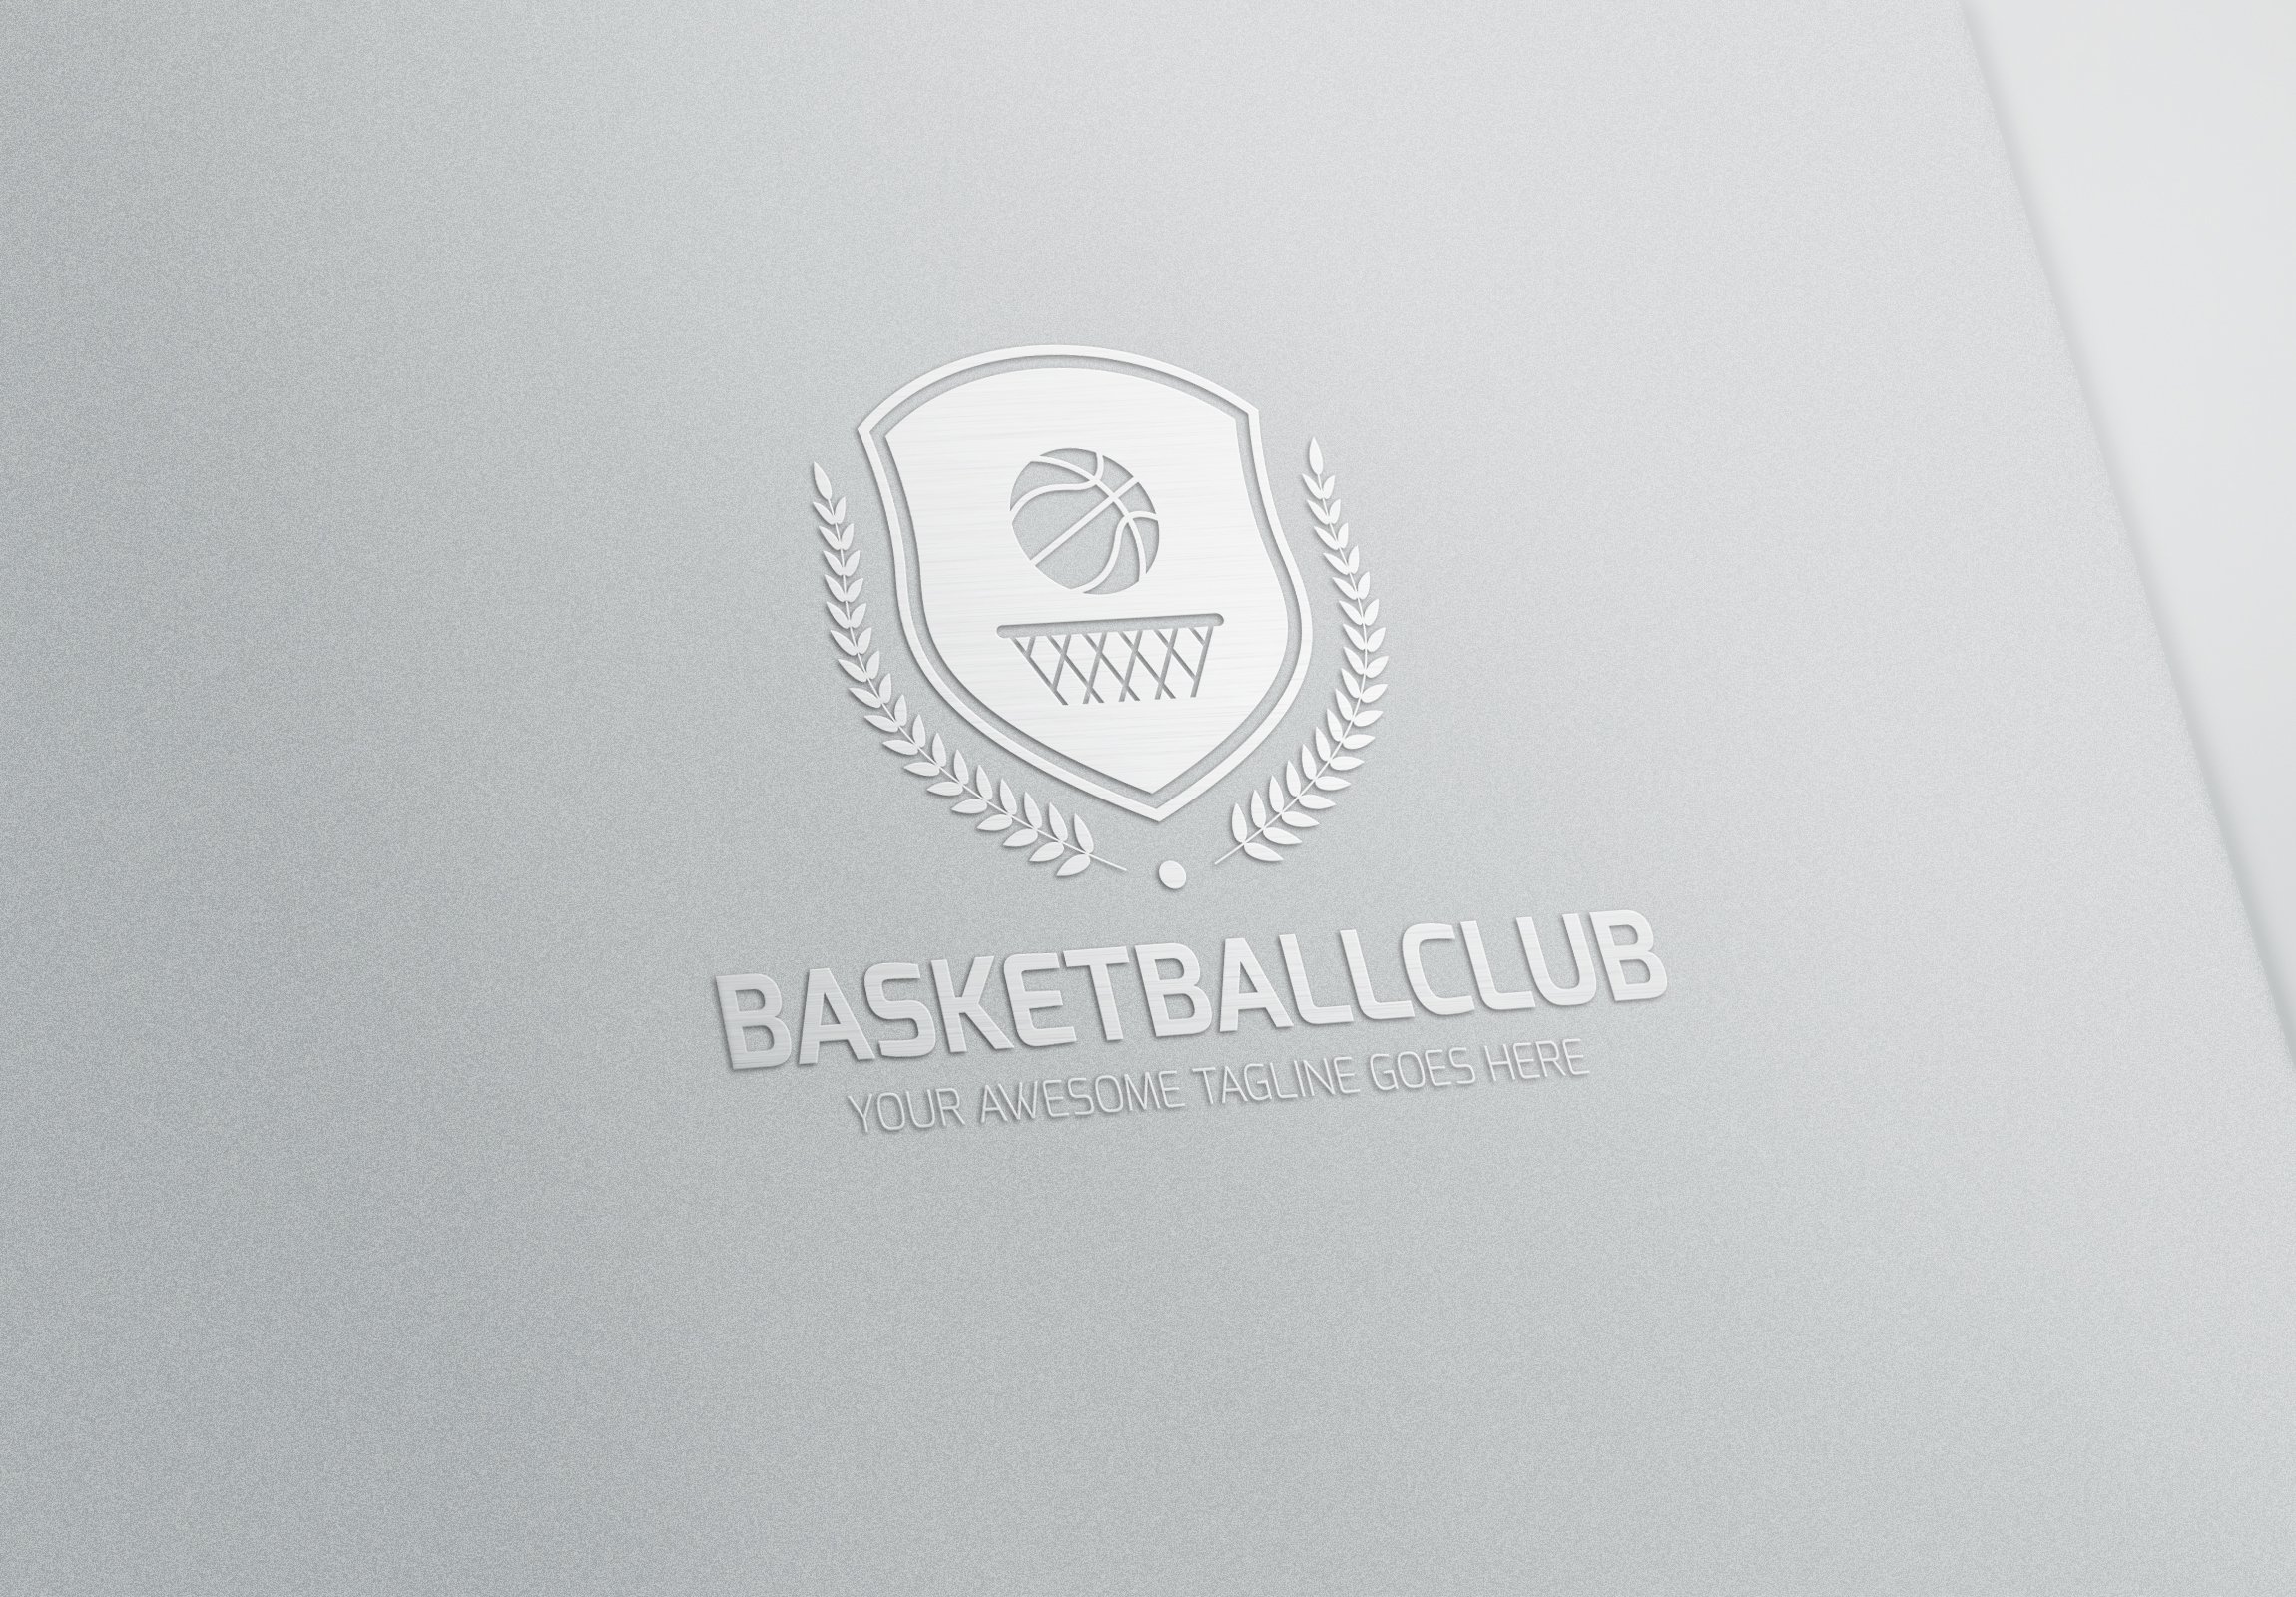 Grey background with a white basketball logo.